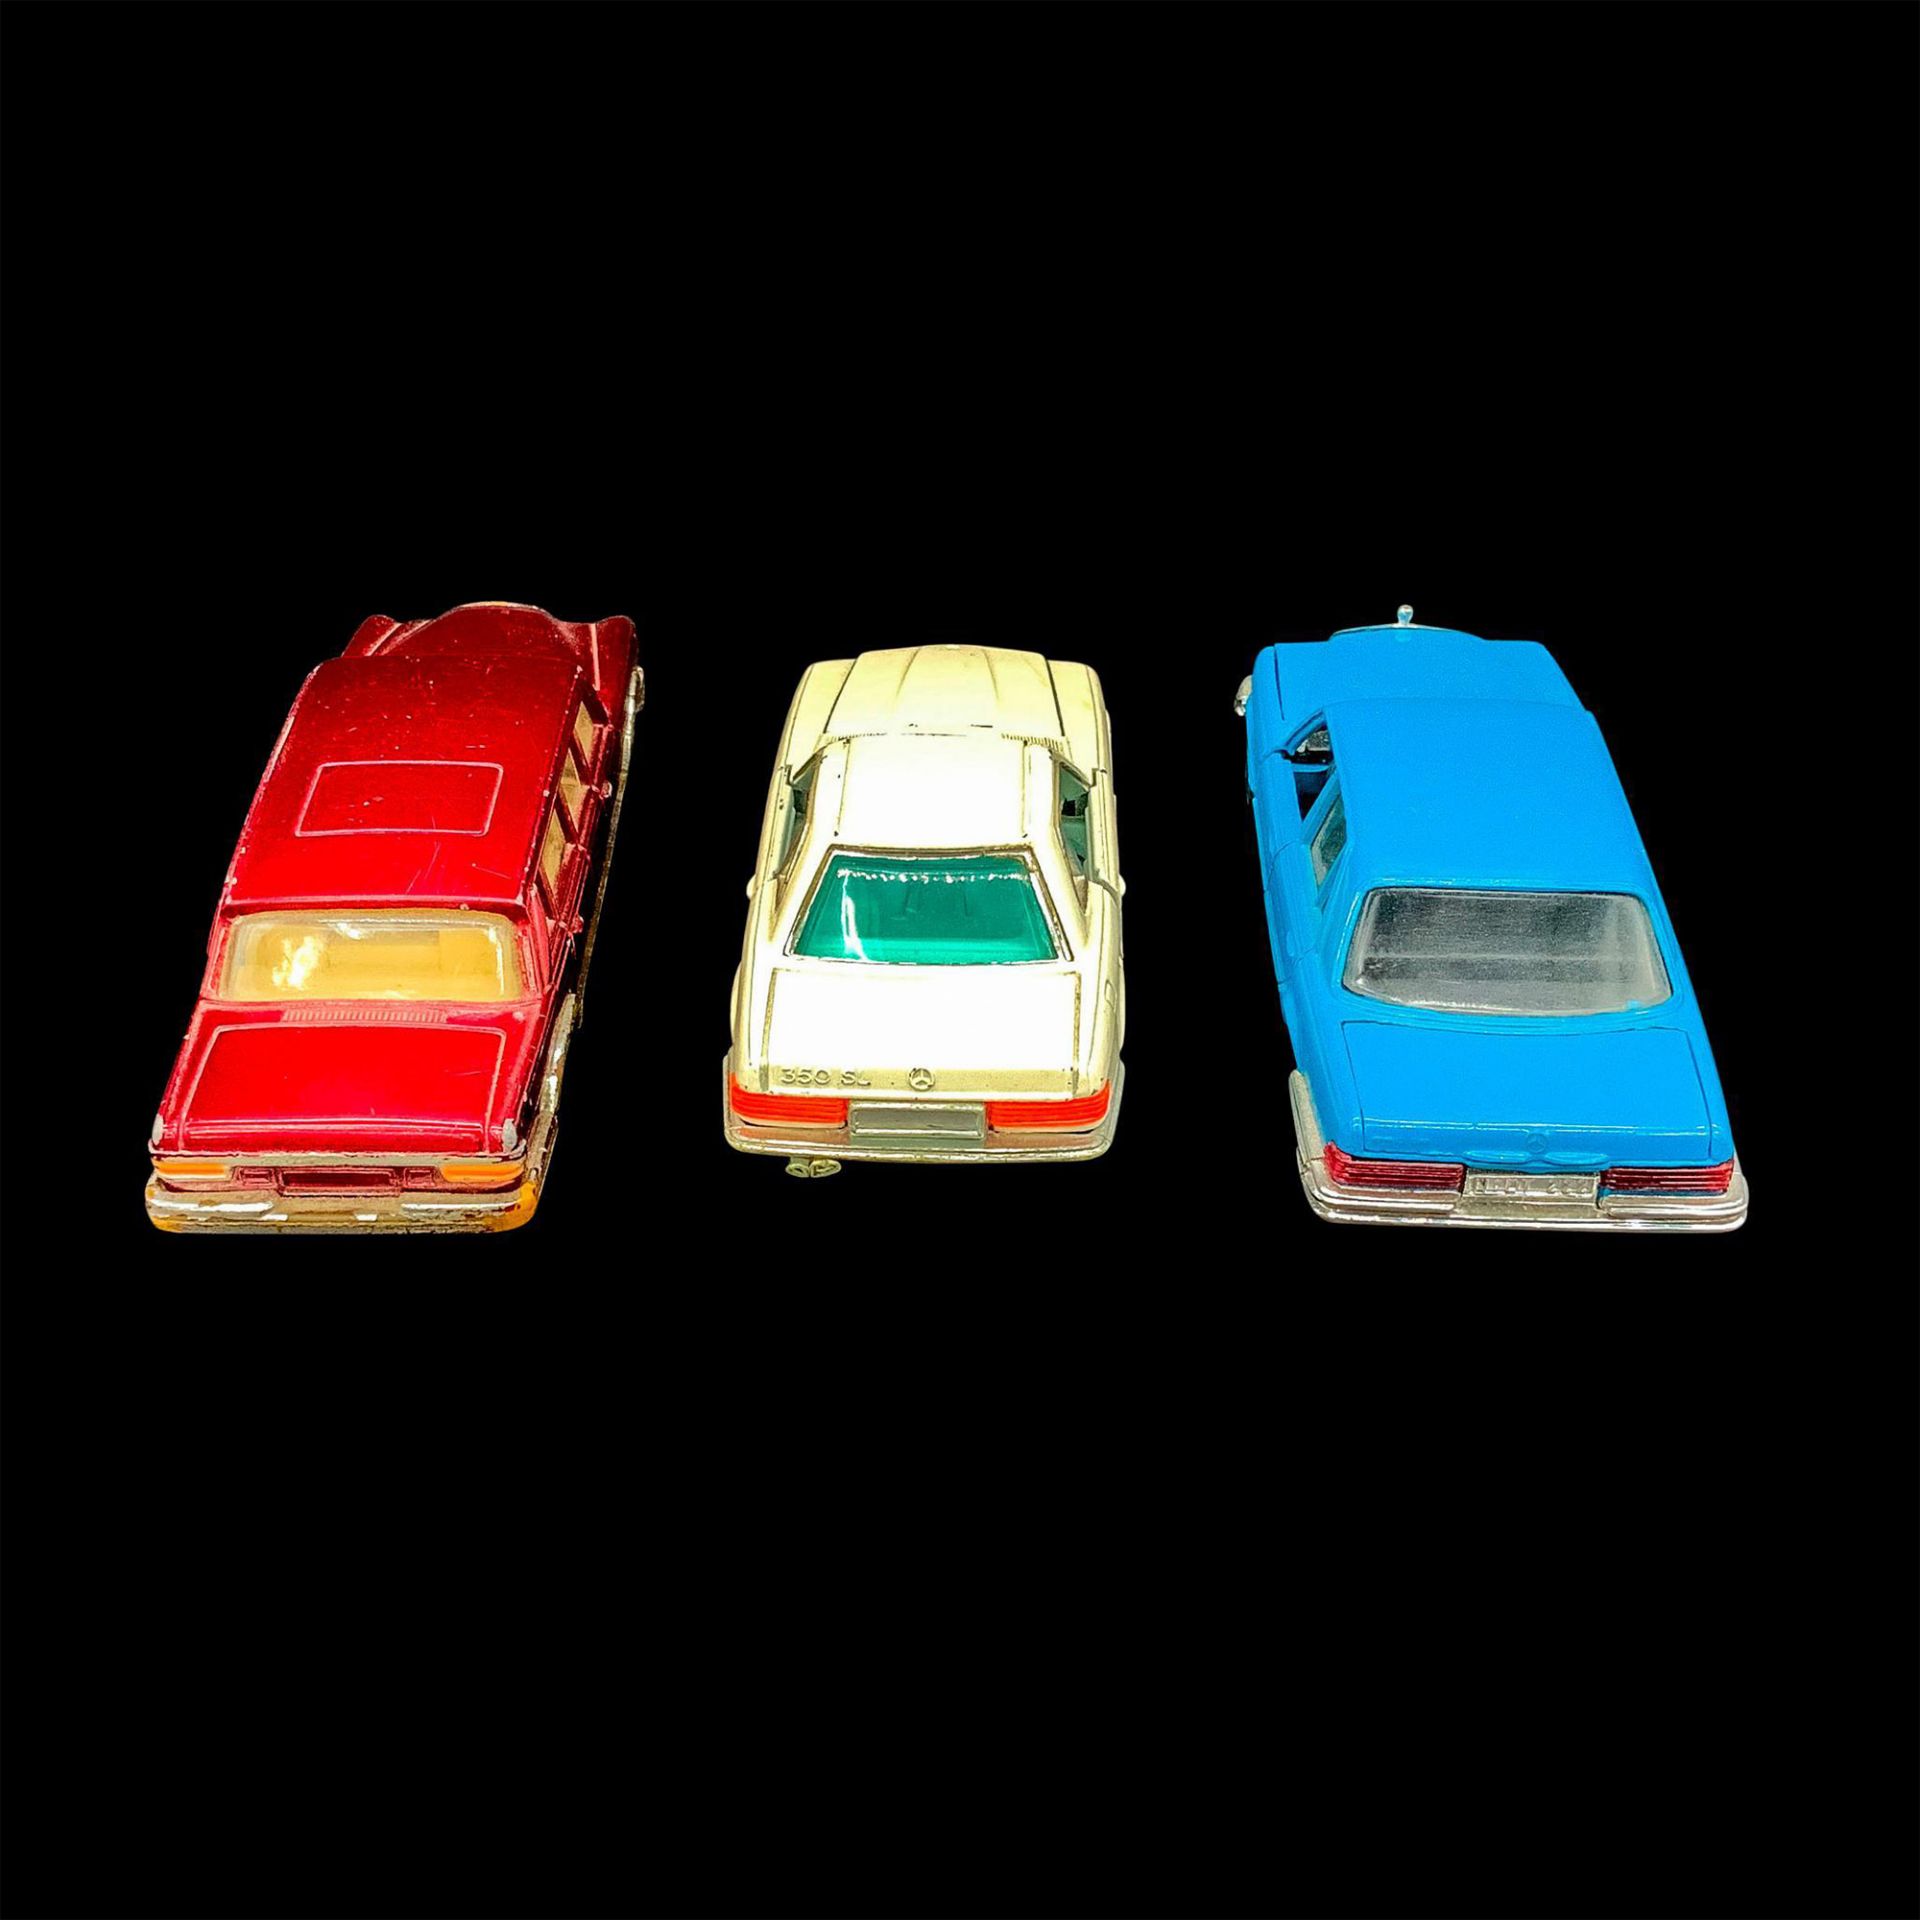 3pc Schuco Mercedes Matchbox Cars Collection - Image 2 of 4